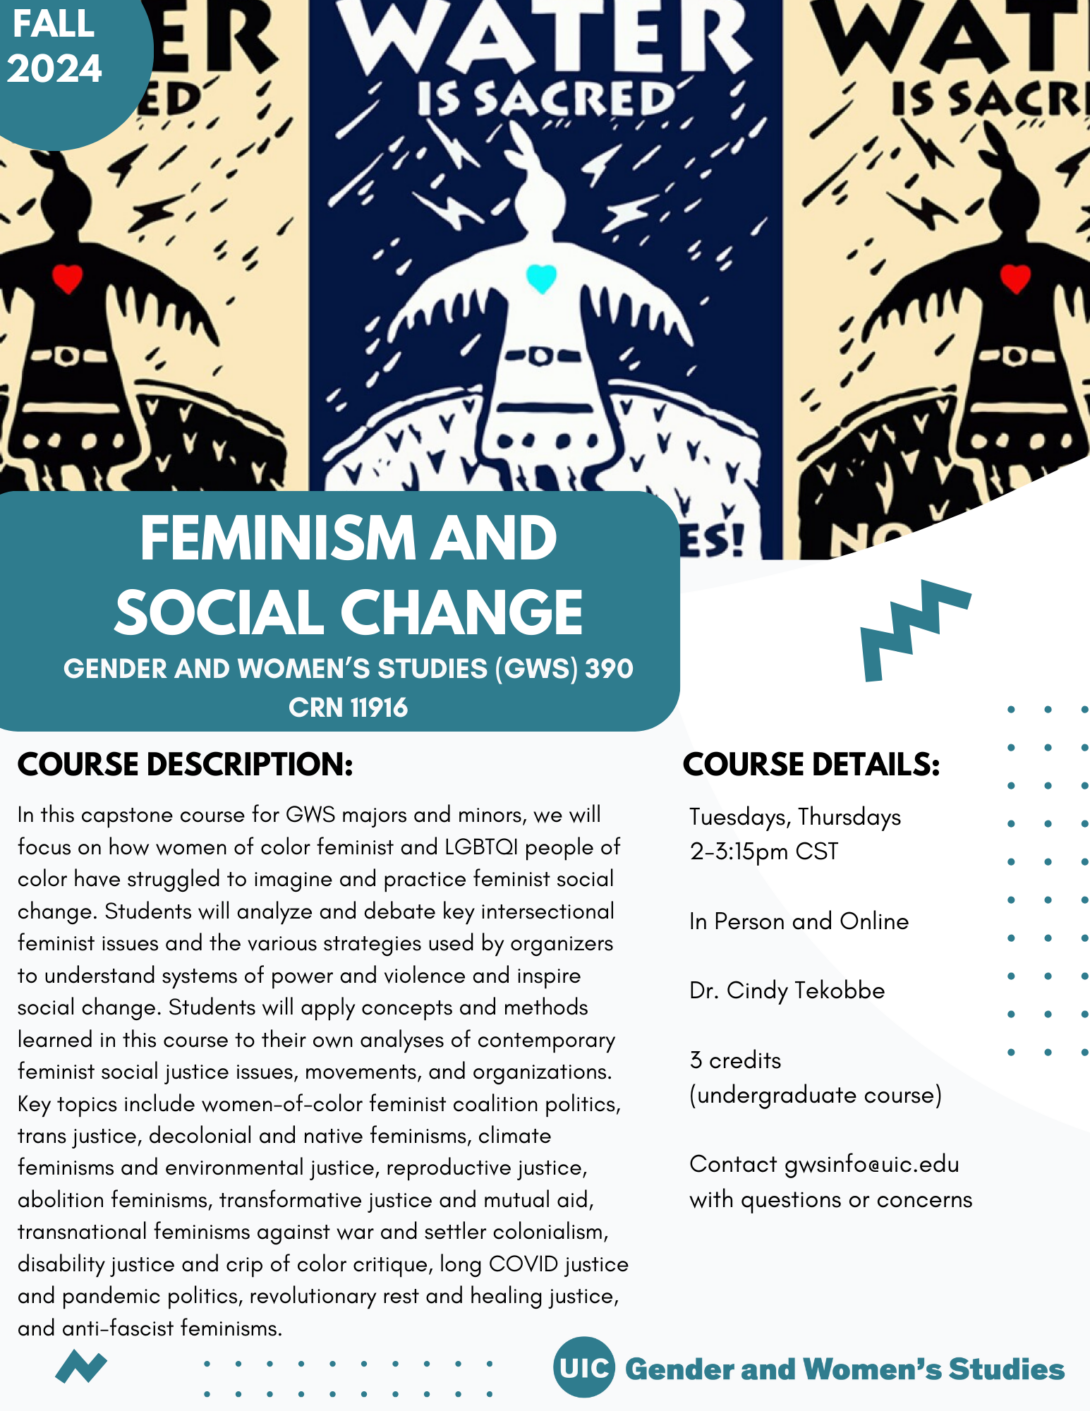 A flyer promoting the fall 2024 Feminism and Social Change course. The top portion of the flyer images of three prints that state Water is Sacred. In the top left corner is a teal circle with Fall 2024 inside it in white text. The bottom left portion of the photo is covered with a teal block that includes the course title in white text. Below that is the course description and course details in black text on a white background. A teal GWS logo appears in the bottom right of the flyer. Parallel lines of teal dots and teal geometric designs decorate the page.